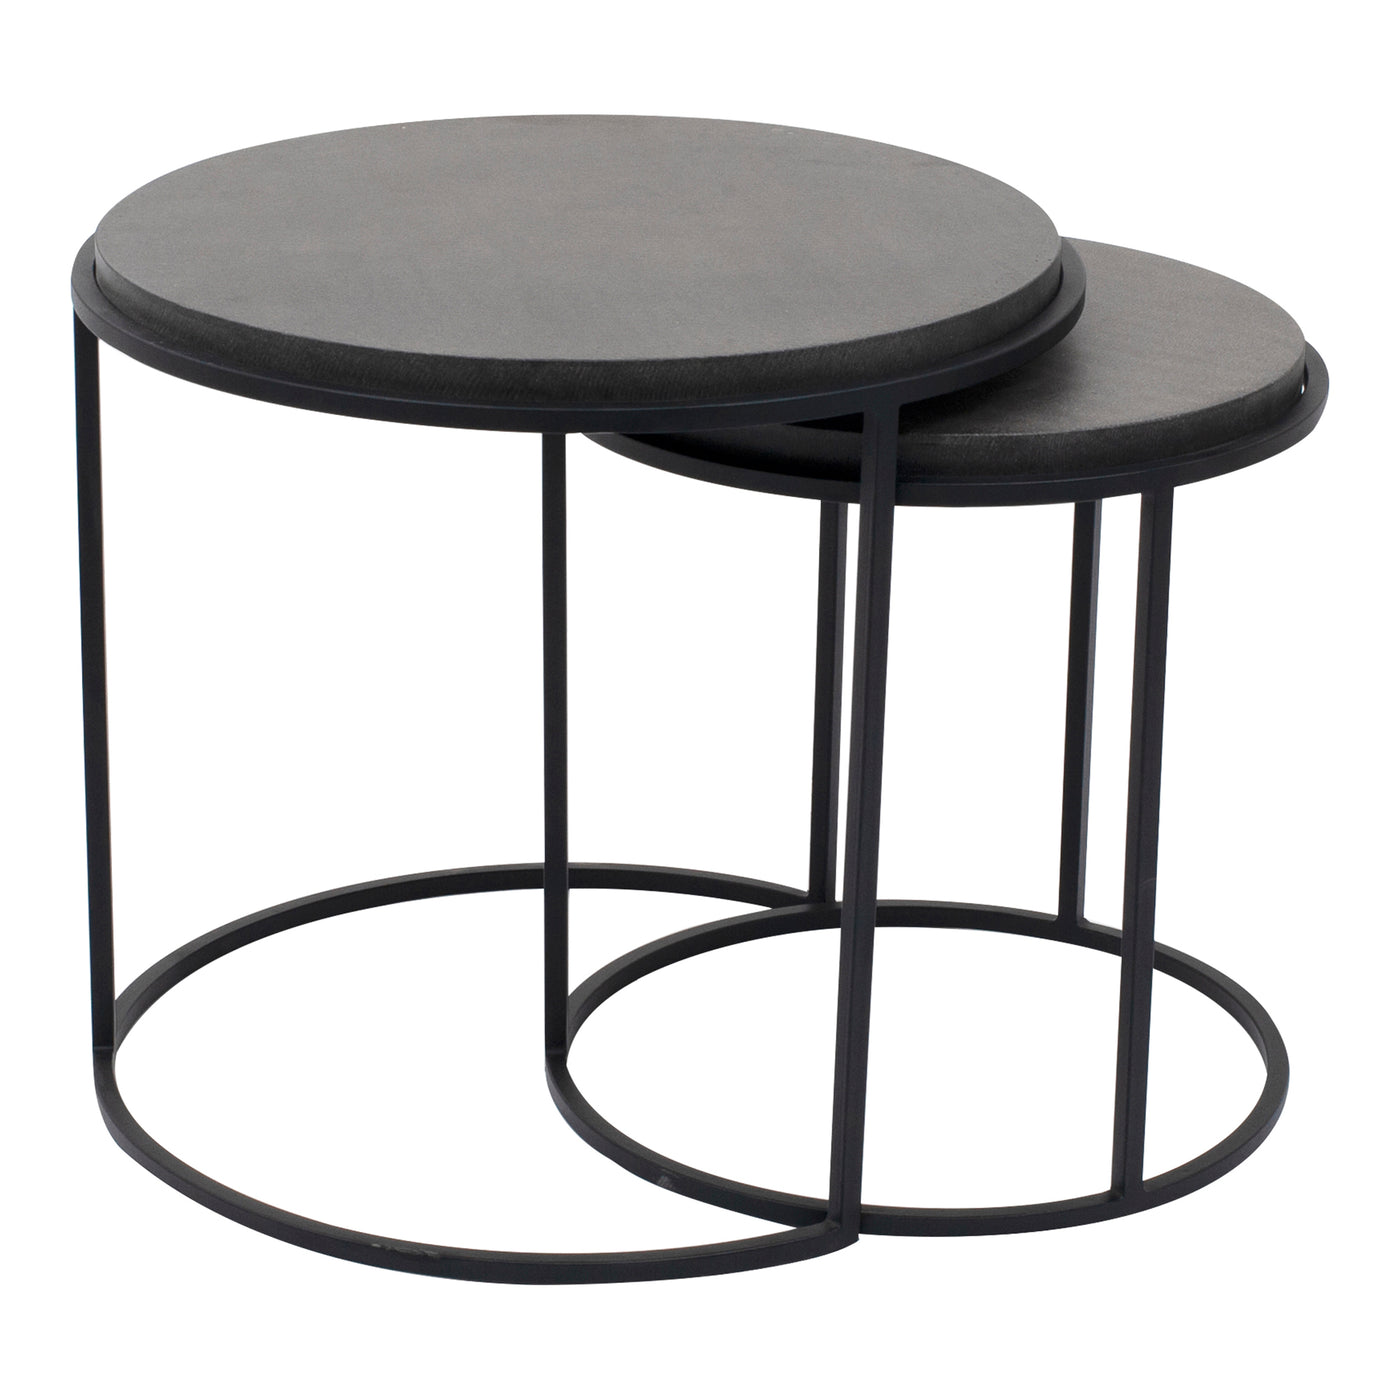 With a lava stone tabletop and iron base, the Roost nesting tables bring a contemporary modern edge to your space. Nesting...